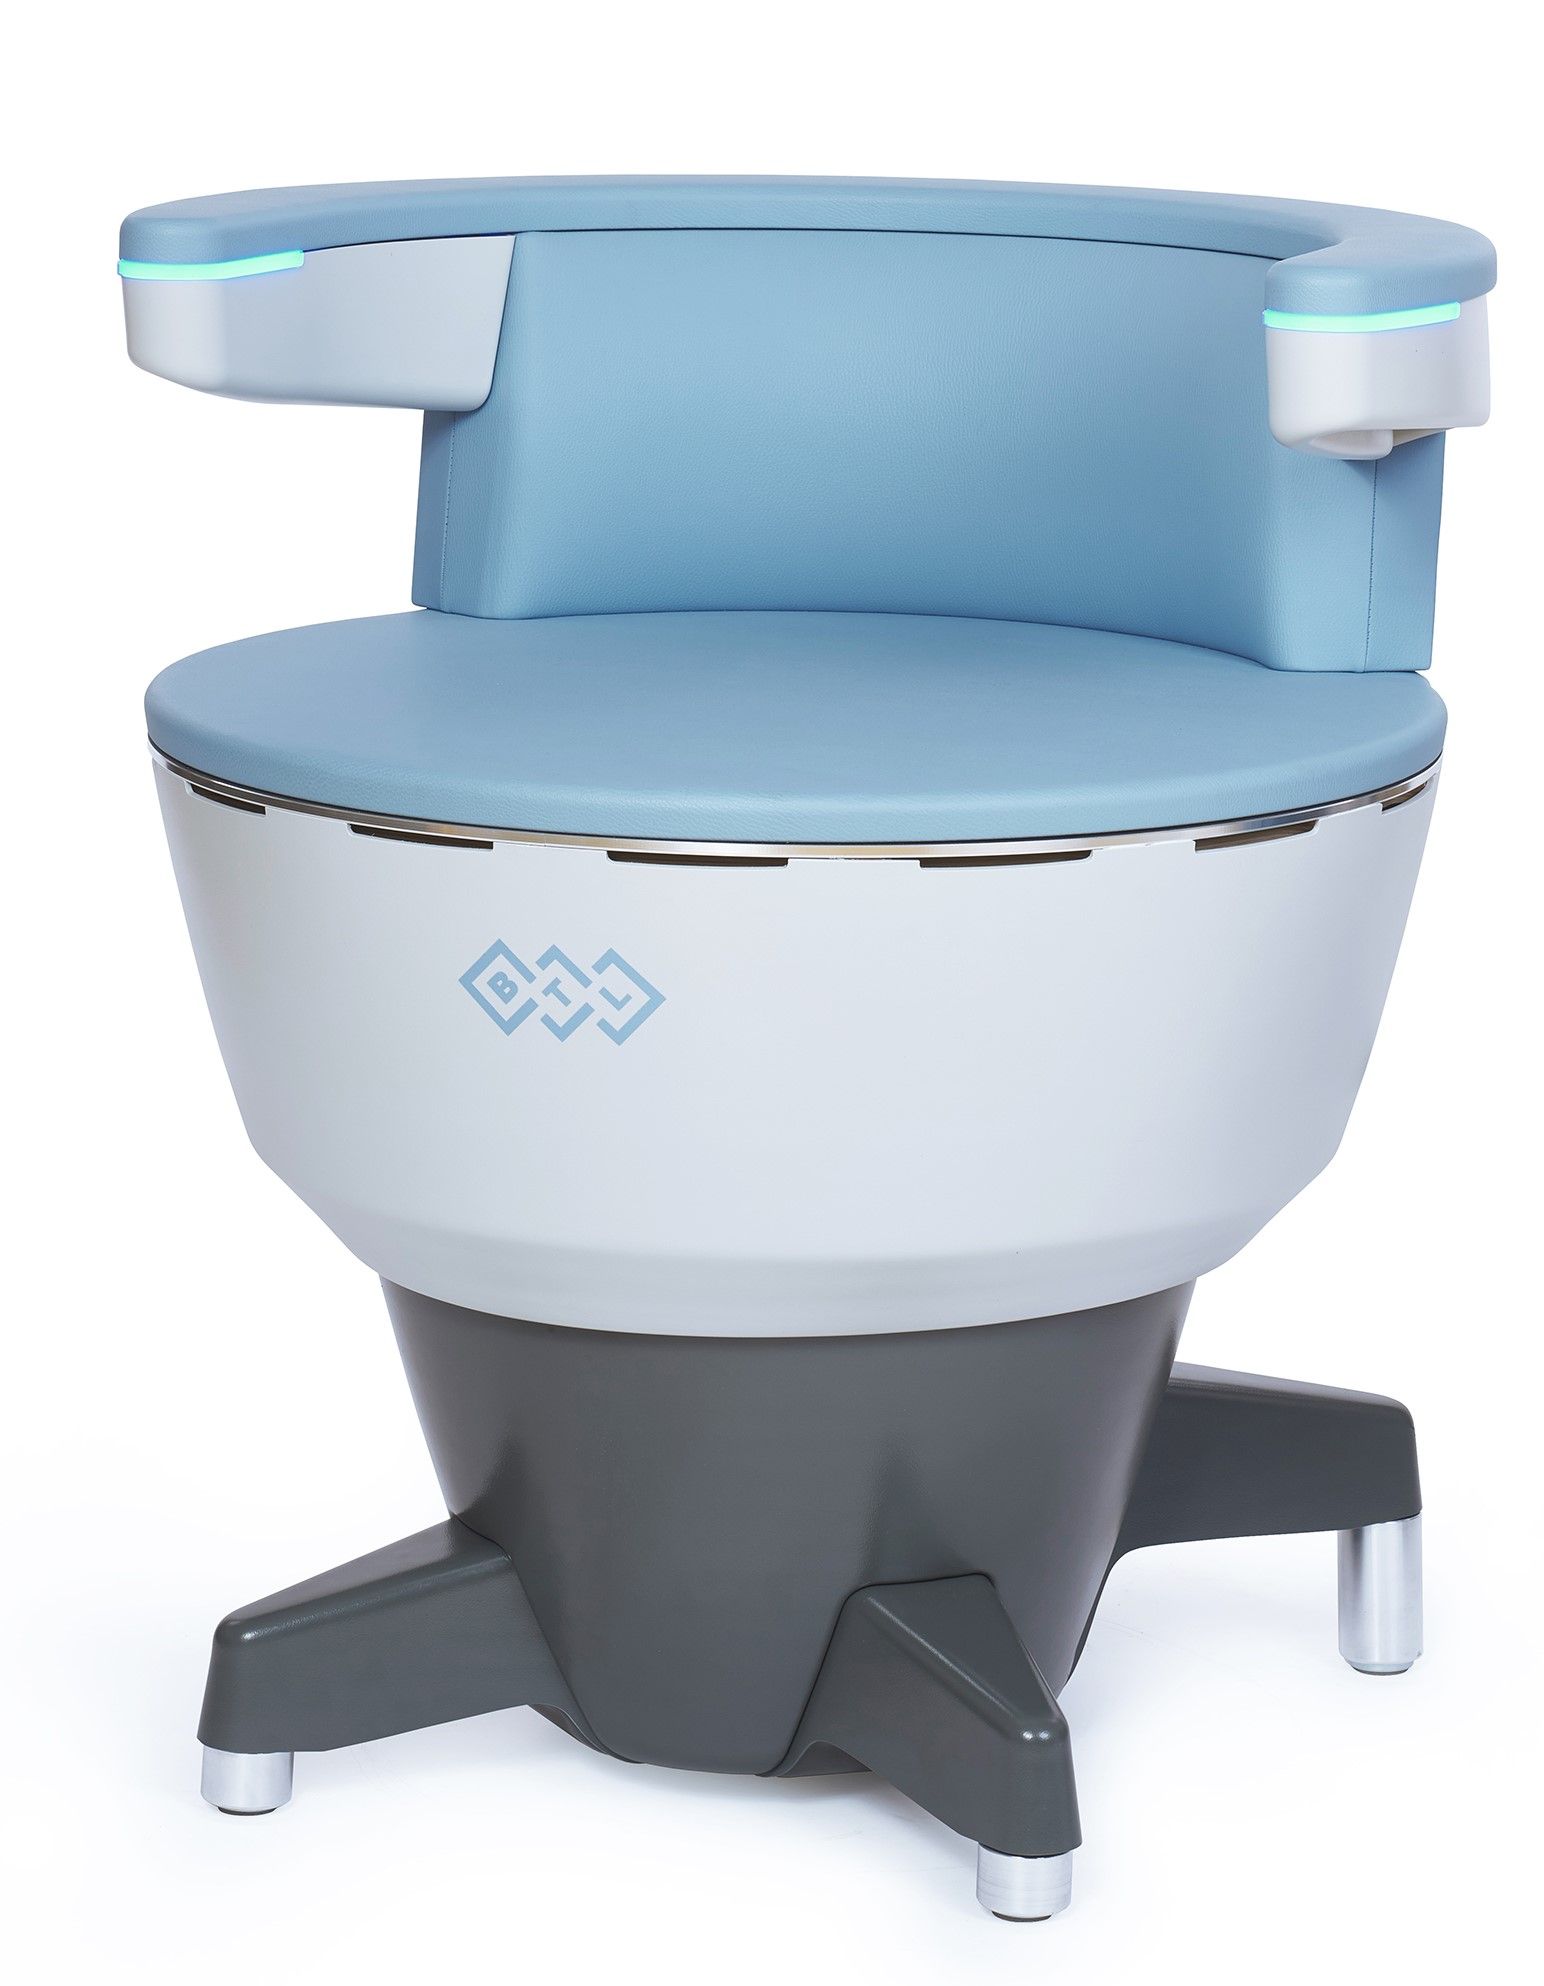 Advanced Emsella chair for pelvic health at LIVation’s modern treatment facility